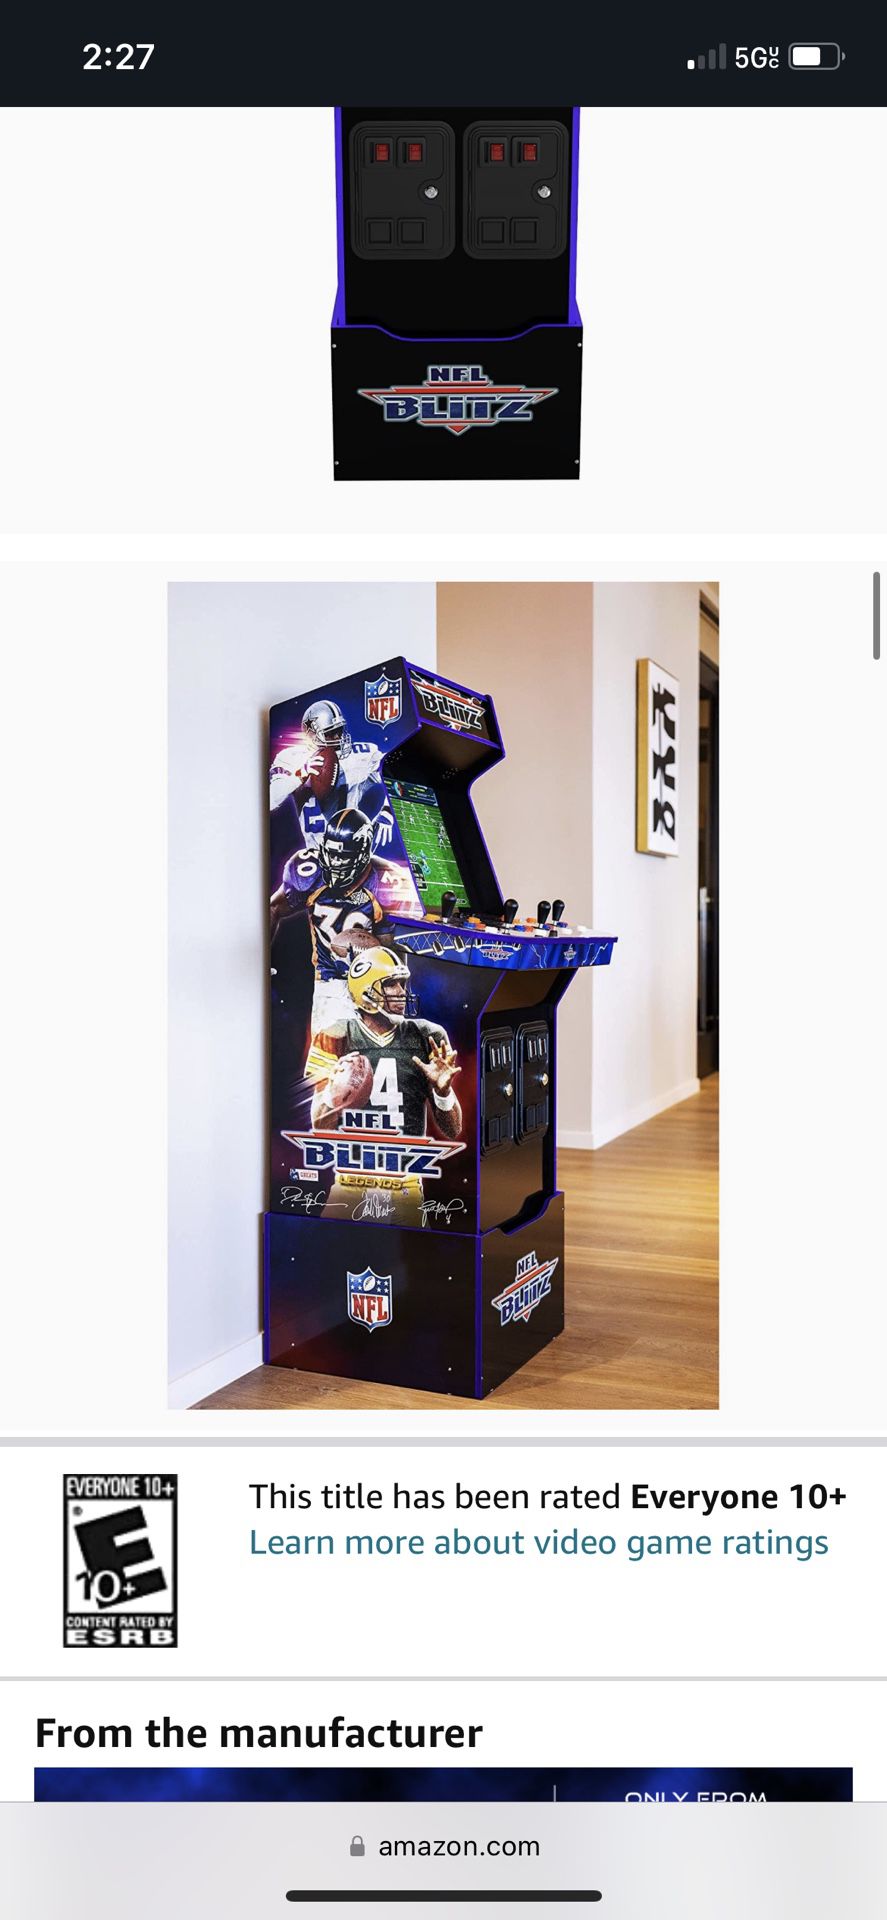  Arcade1Up NFL Blitz Legends Arcade Machine - 4 Player, 5-foot  tall full-size stand-up game for home with WiFi for online multiplayer,  leaderboards, and a light-up marquee : Toys & Games